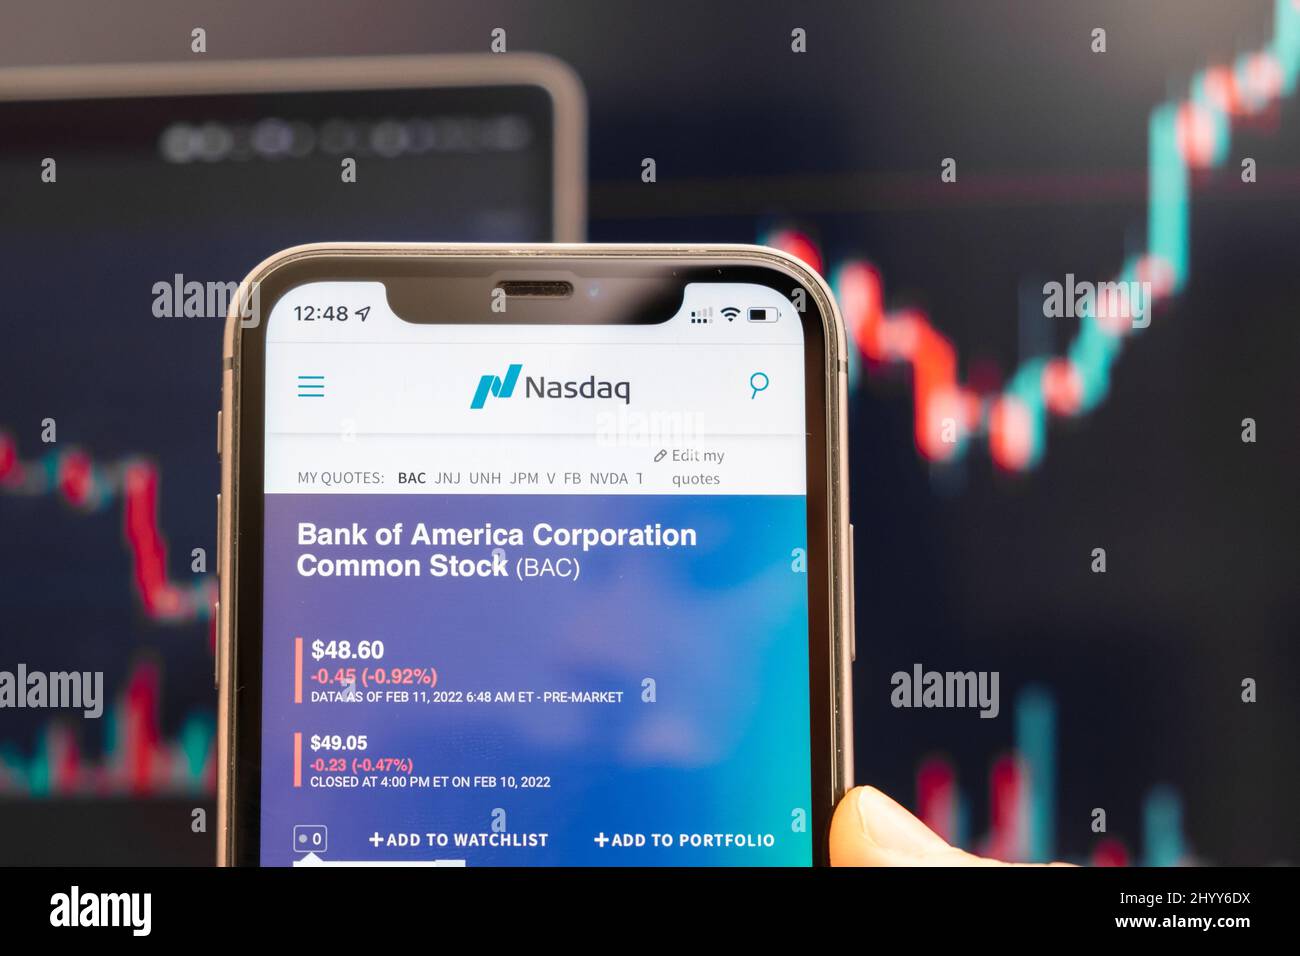 Bank of America Corporation logo of stock price on the screen of smartphone in mans hand with changing trend on the chart on the background, February 2022, San Francisco, USA. Stock Photo